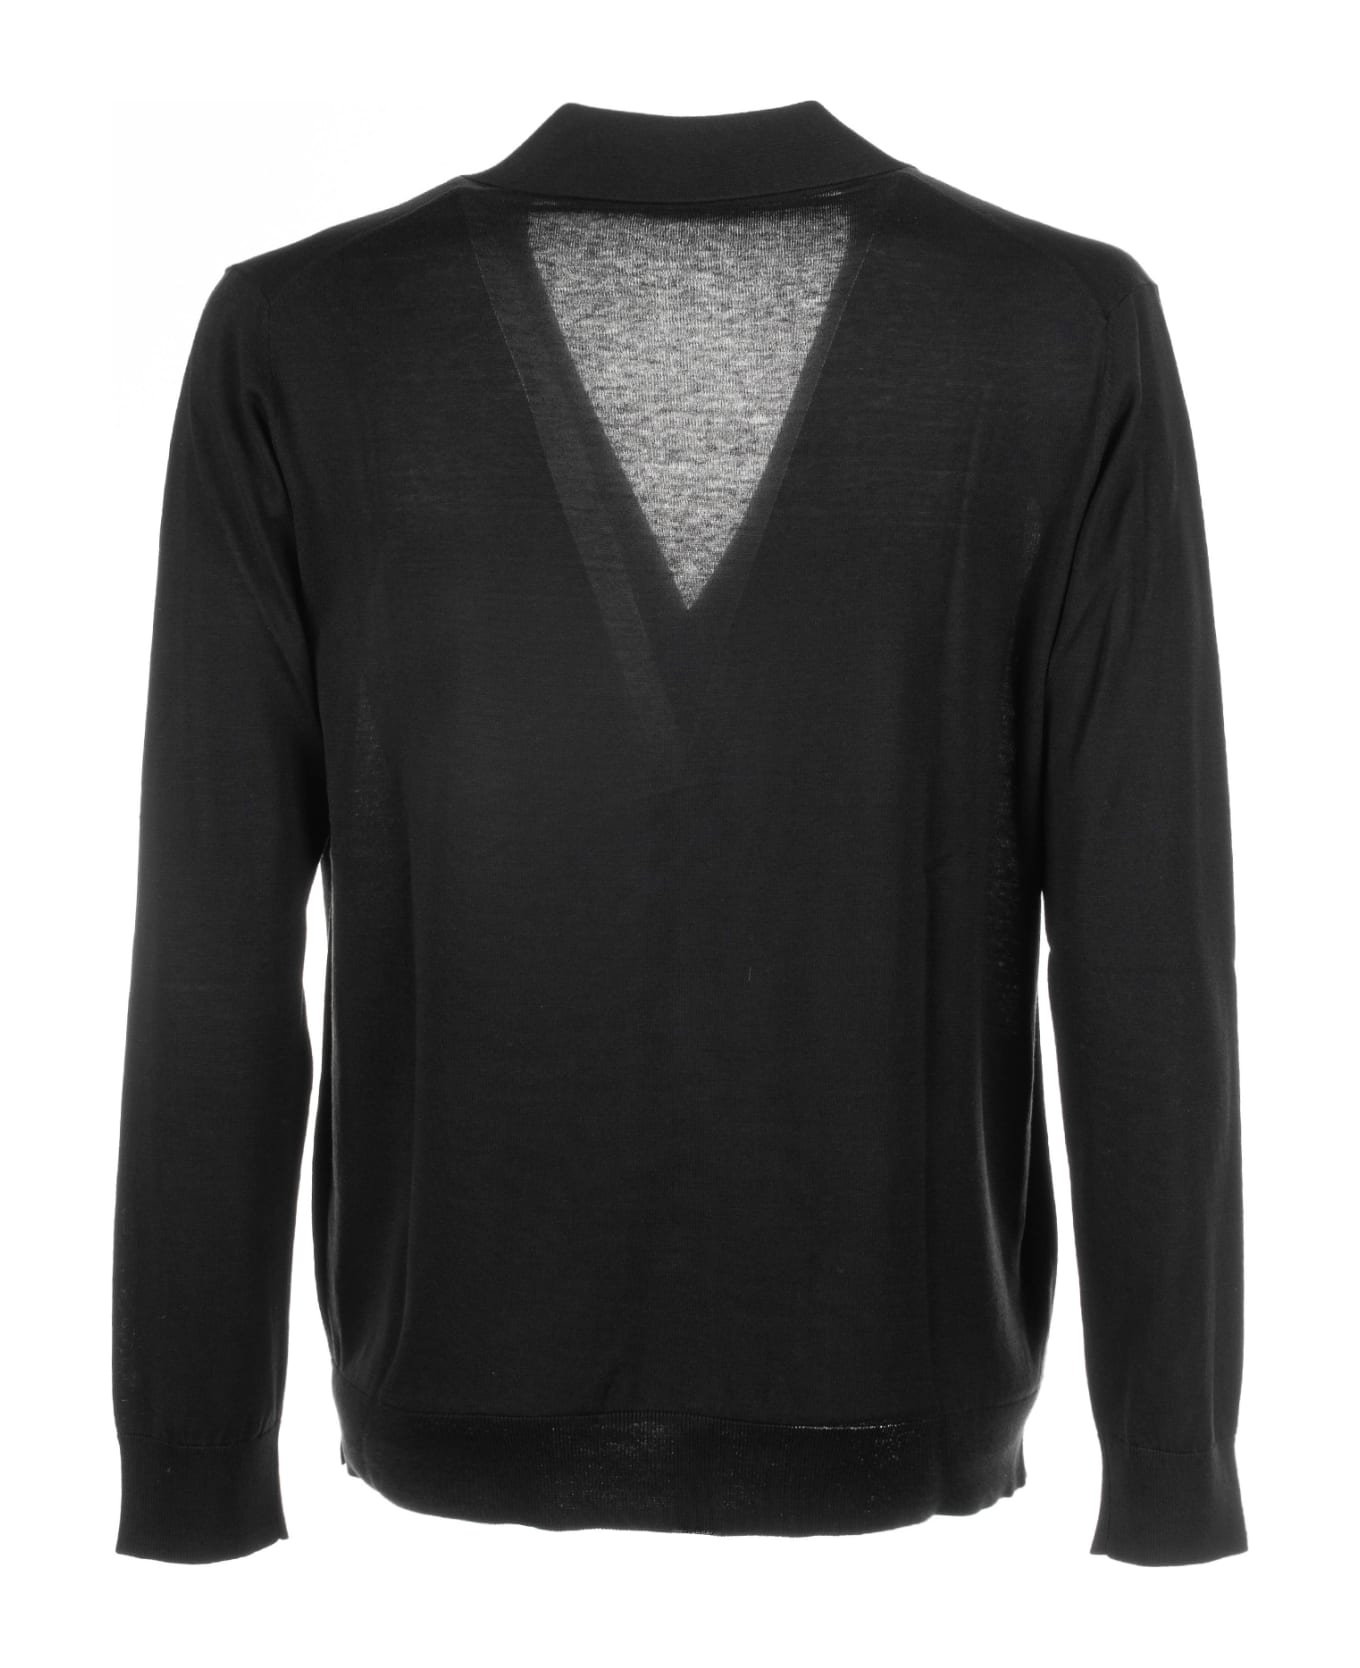 Paolo Pecora Black Cardigan With Pockets And Buttons - NERO